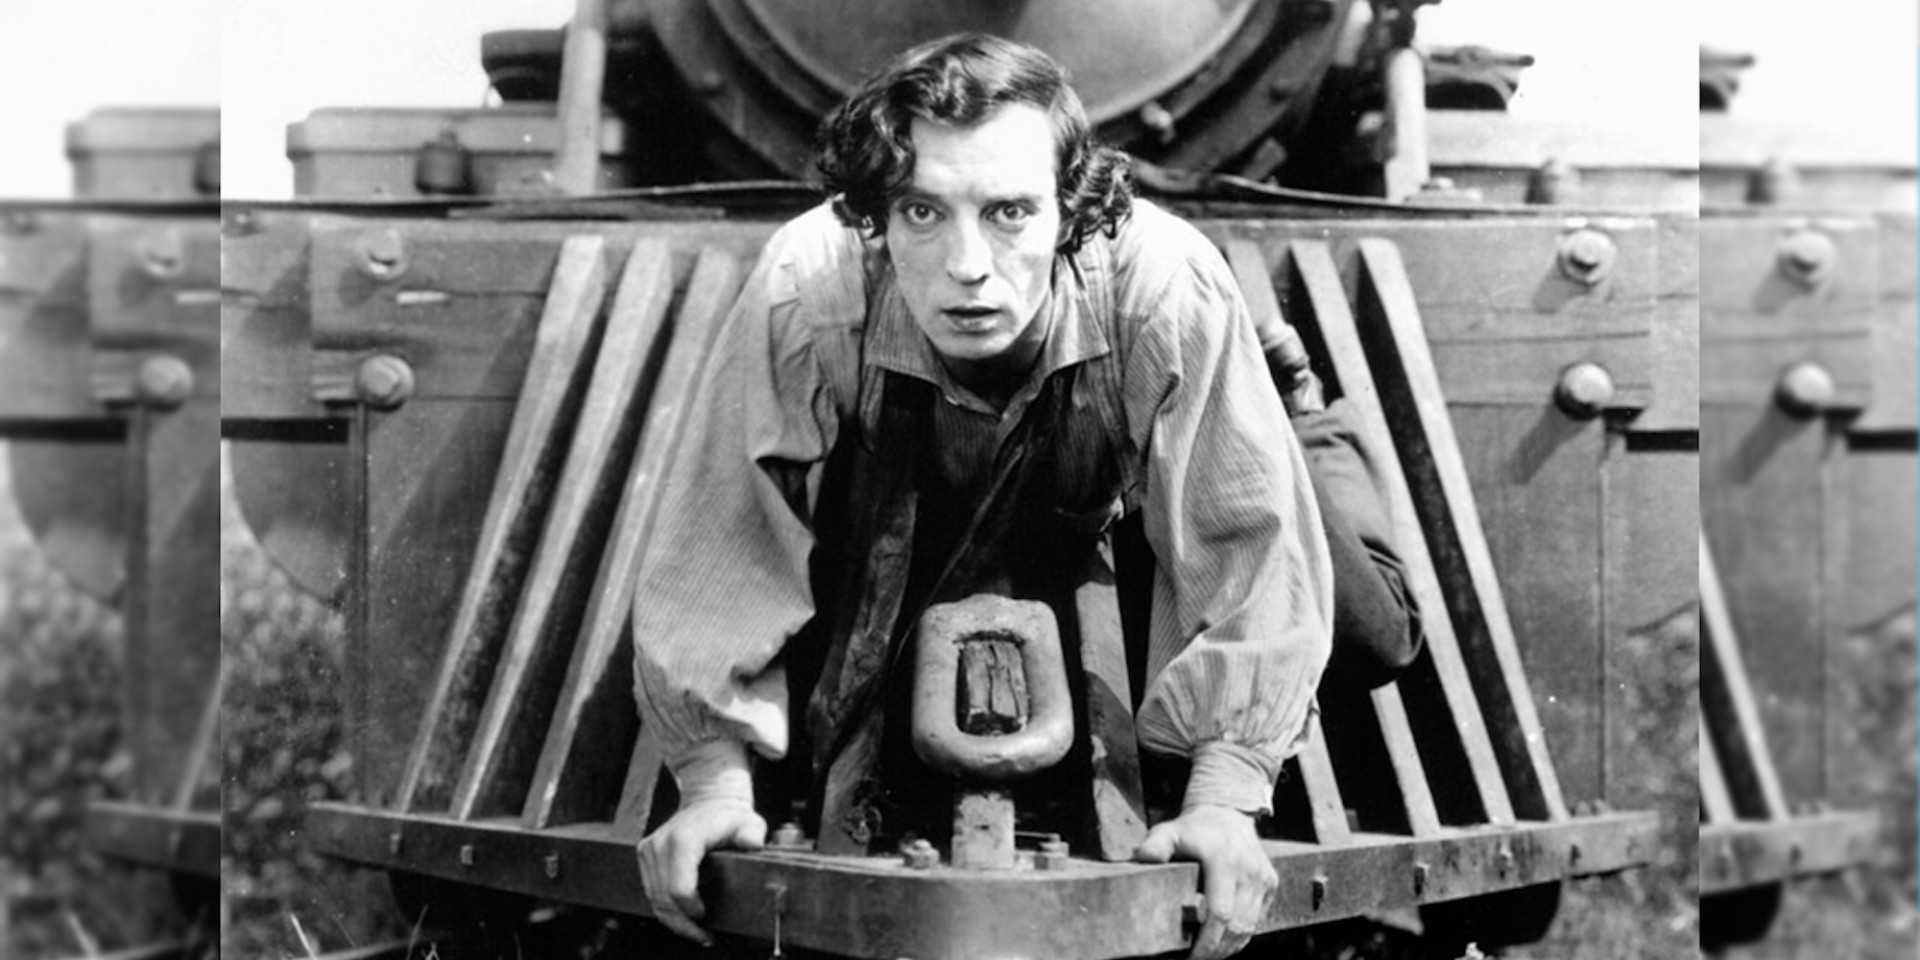 Still image from Buster Keaton image. Buster Keaton on top of a locomotive.